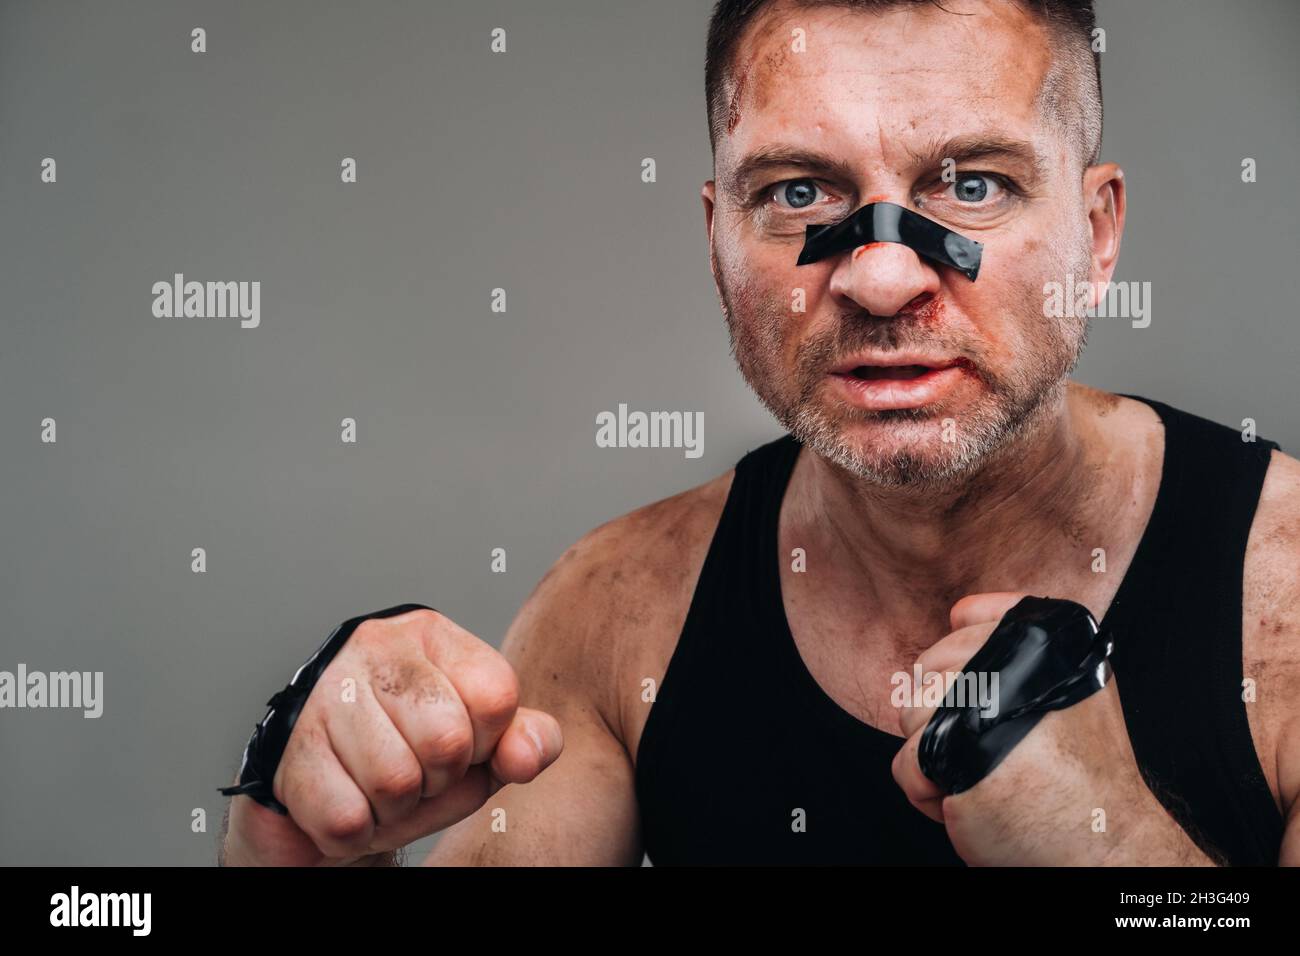 on a gray background stands a battered man in a black T shirt looking like a fighter and preparing for a fight. Stock Photo